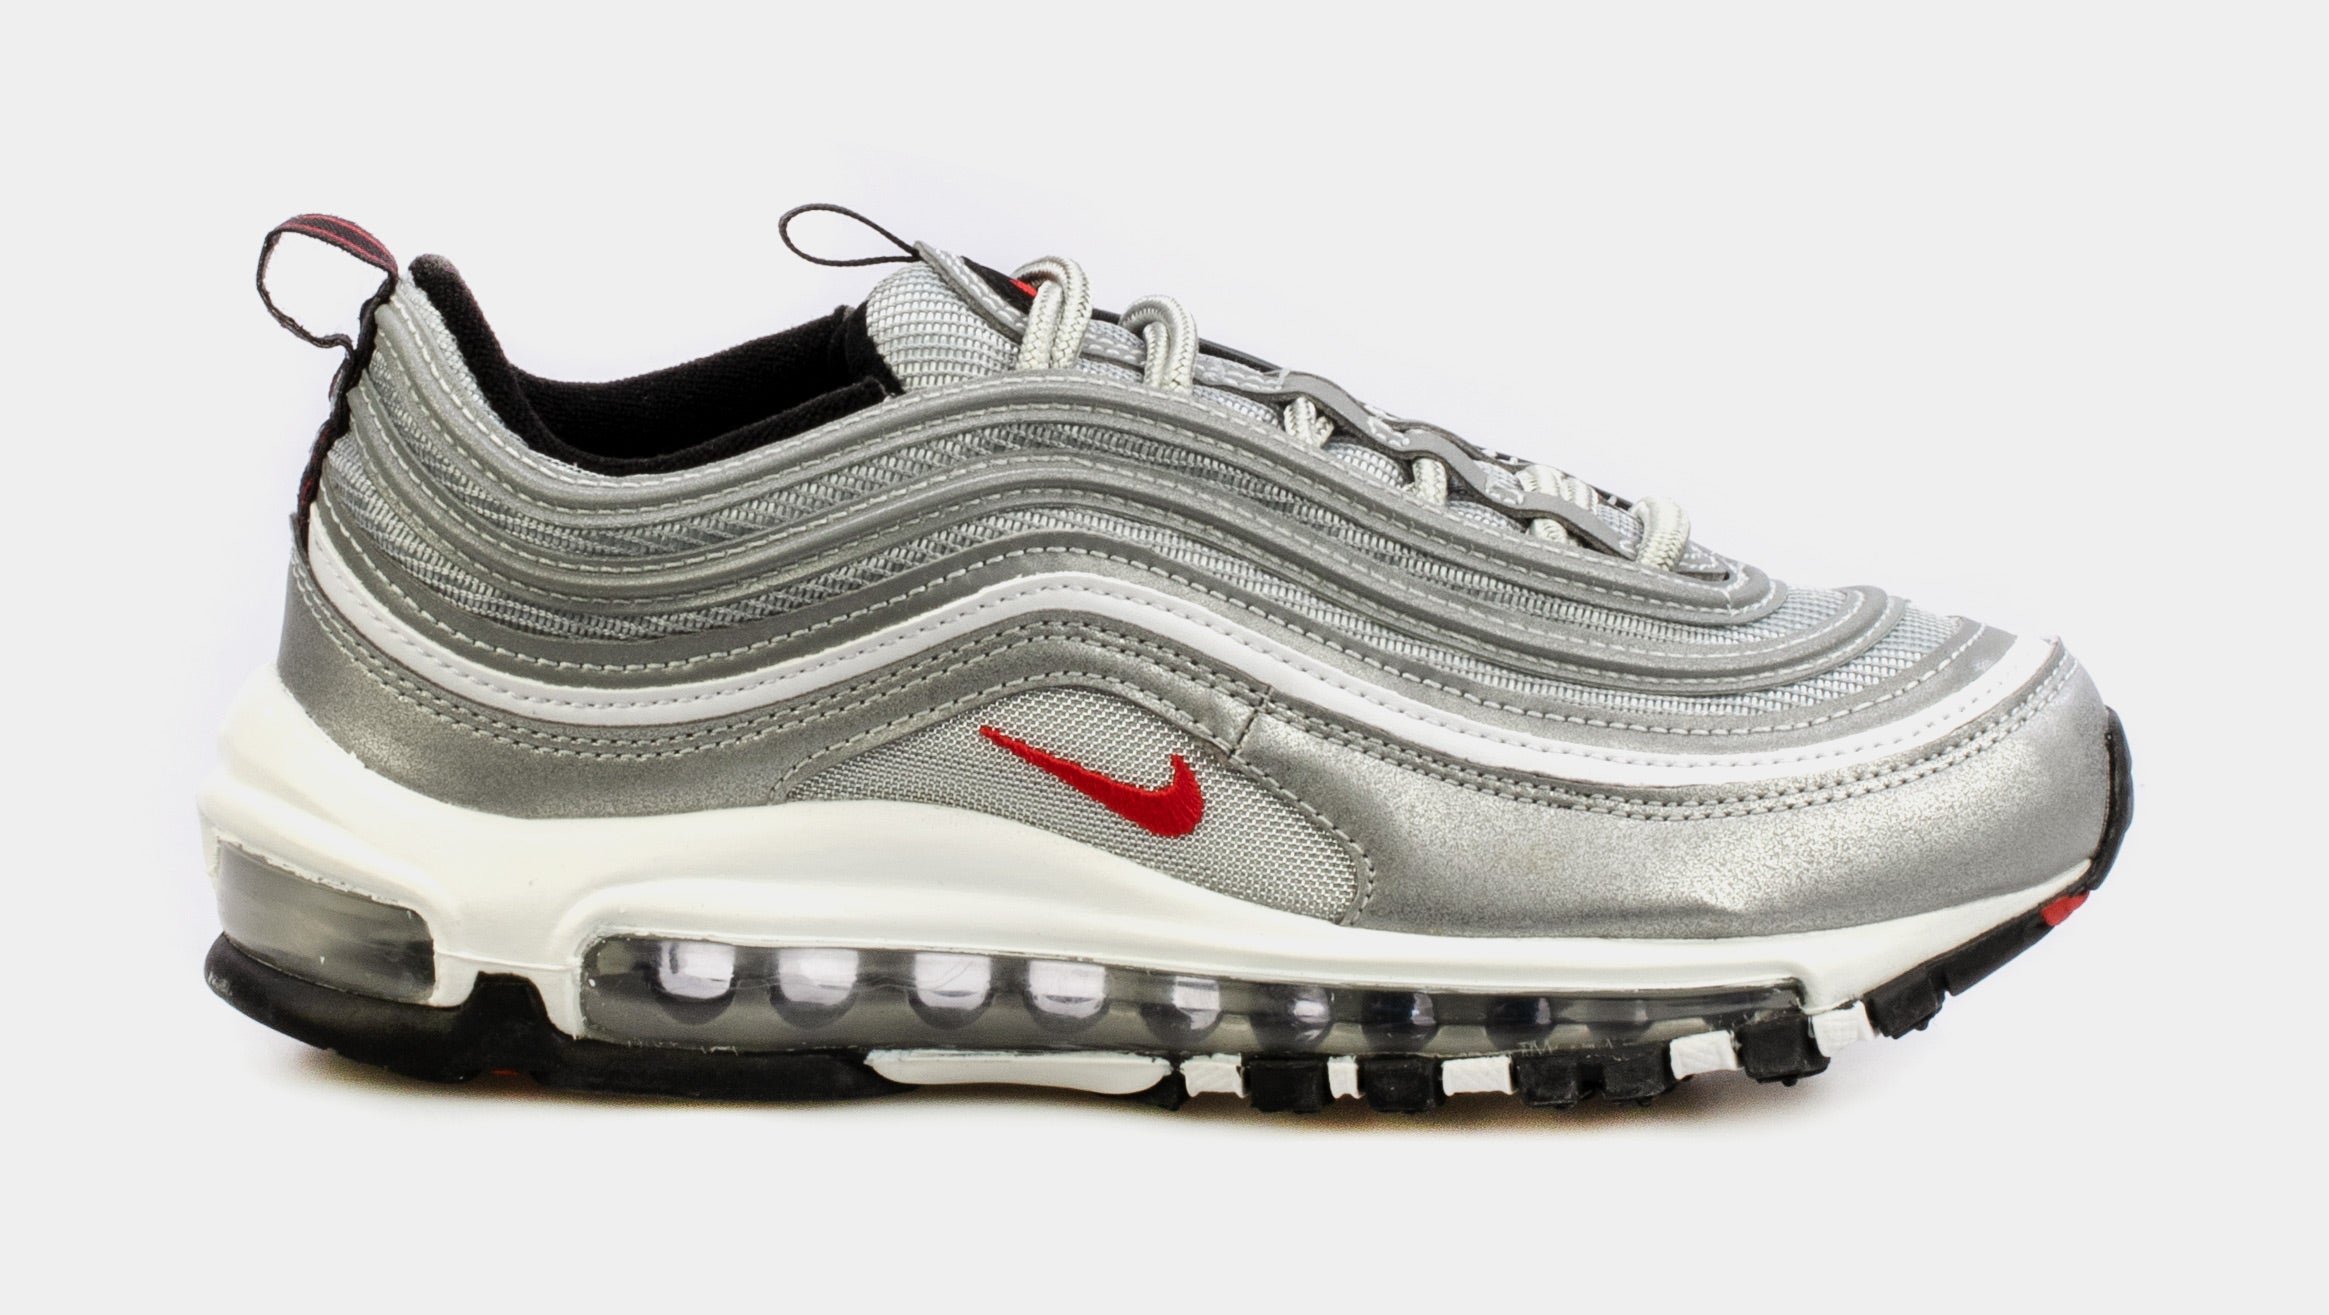 Nike Air Max 97 Bullet Womens Lifestyle Shoes Grey DQ9131-002 – Shoe Palace